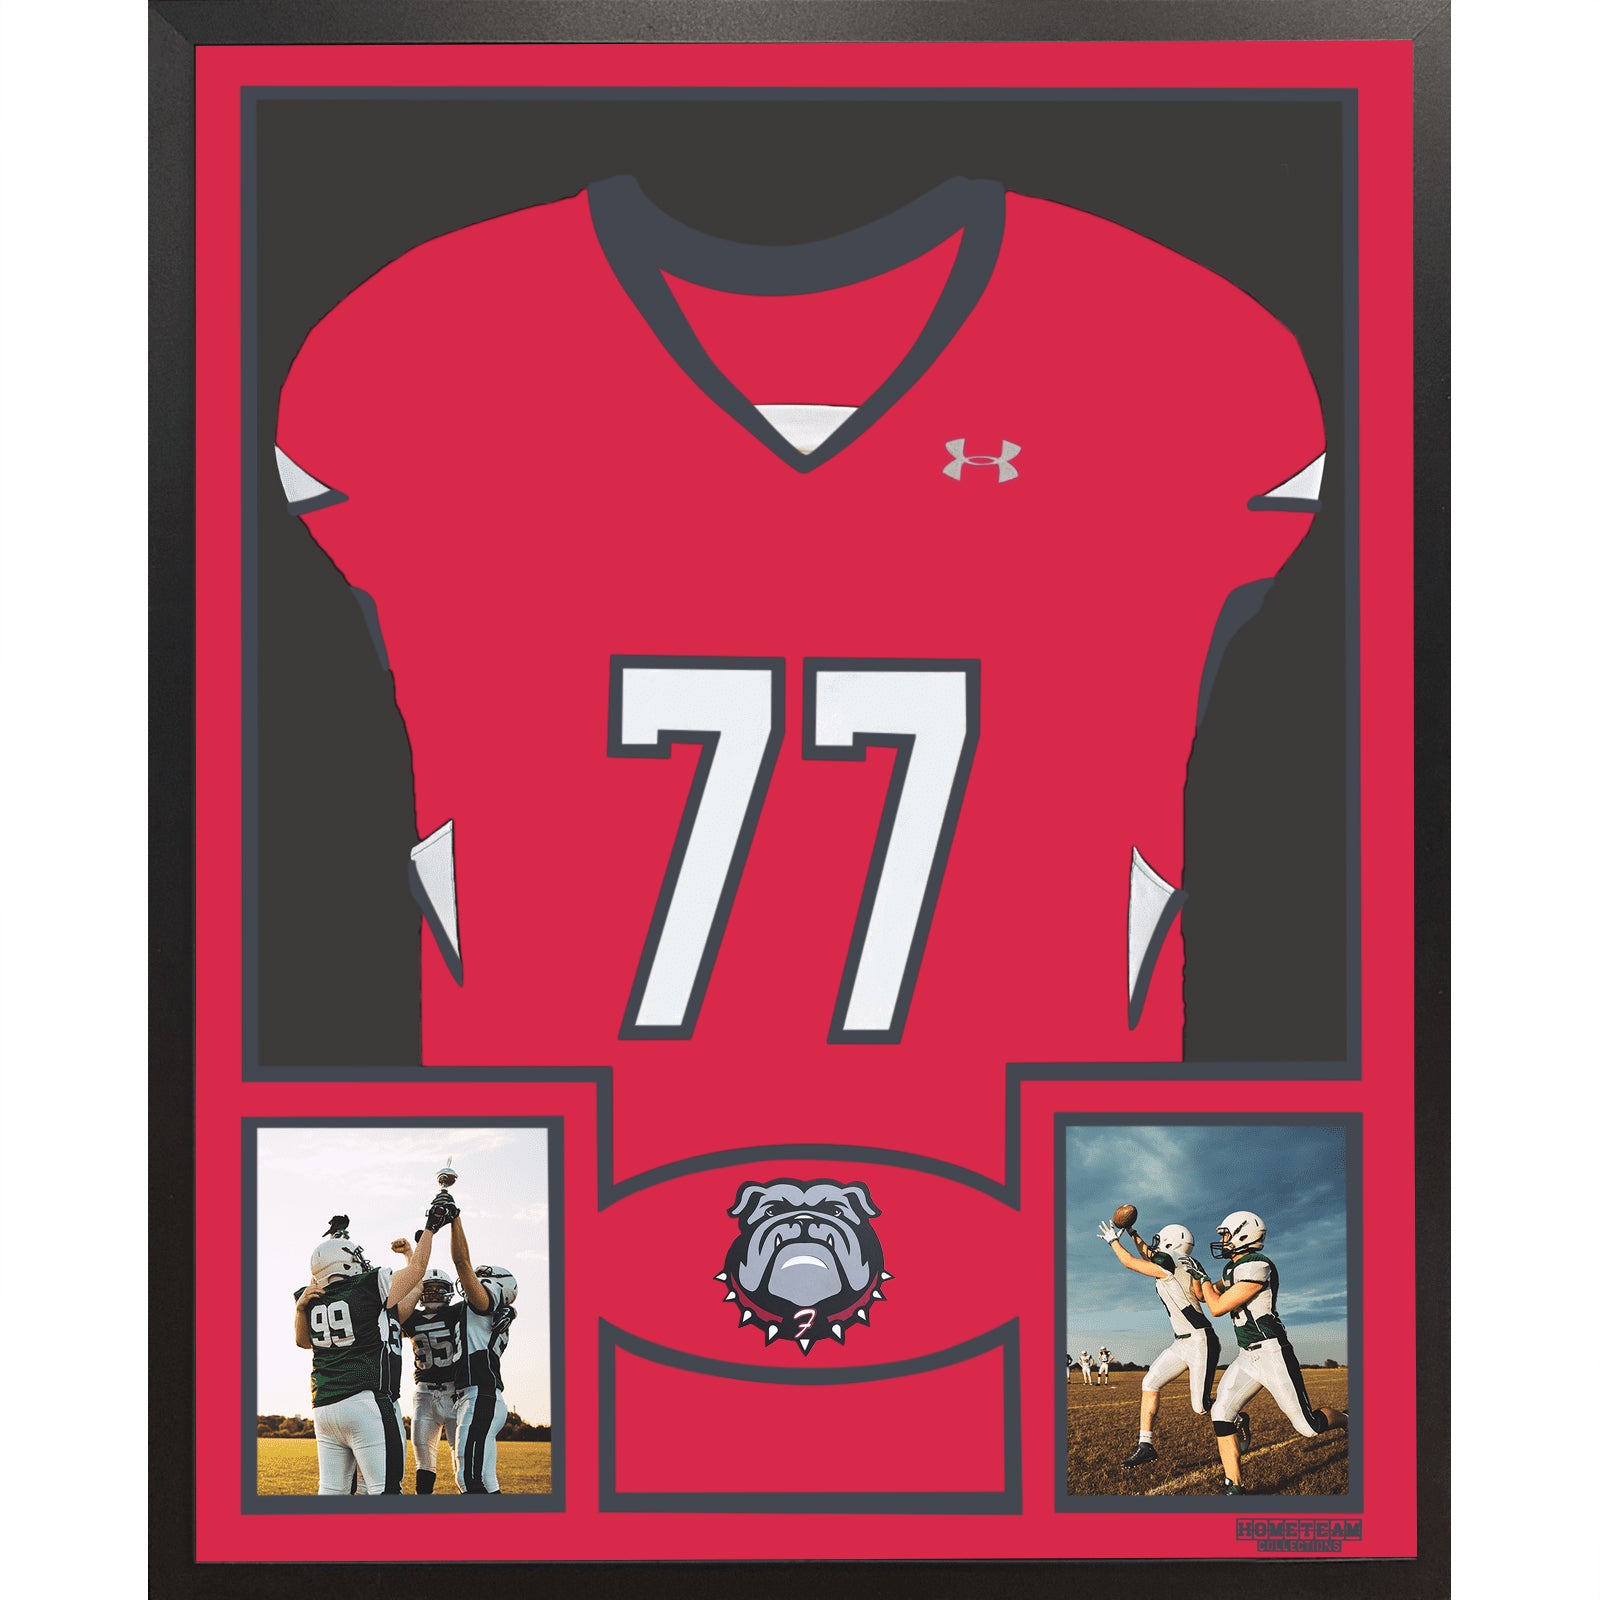 Freedom Area Bulldogs Premier Large Framed Jersey with Dual Photo Displays_ 1